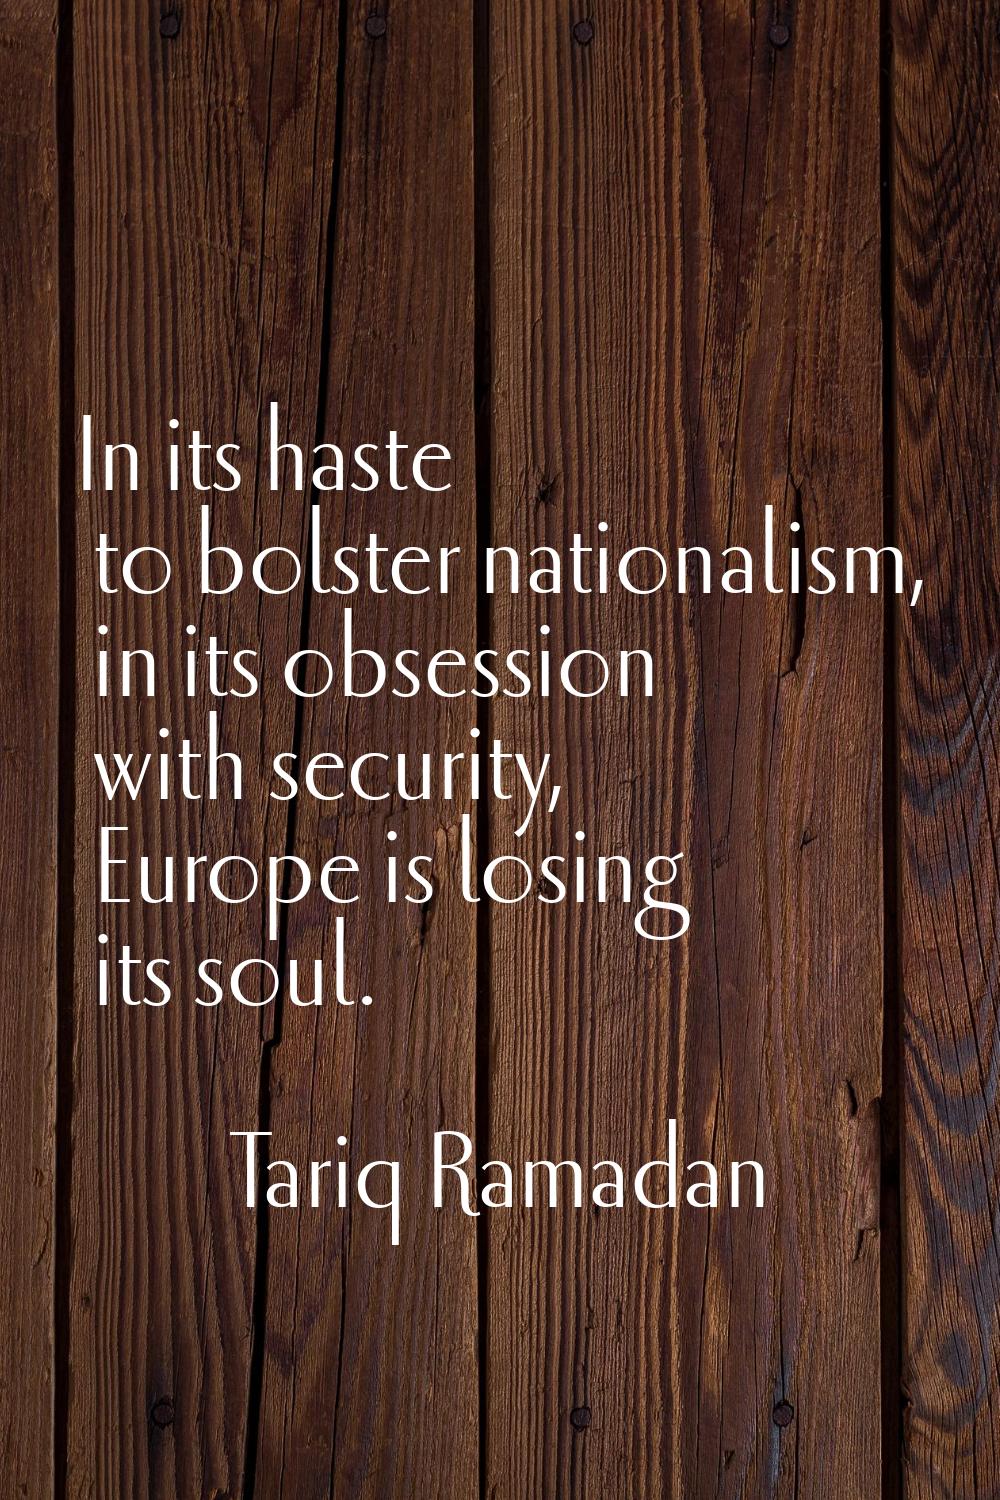 In its haste to bolster nationalism, in its obsession with security, Europe is losing its soul.